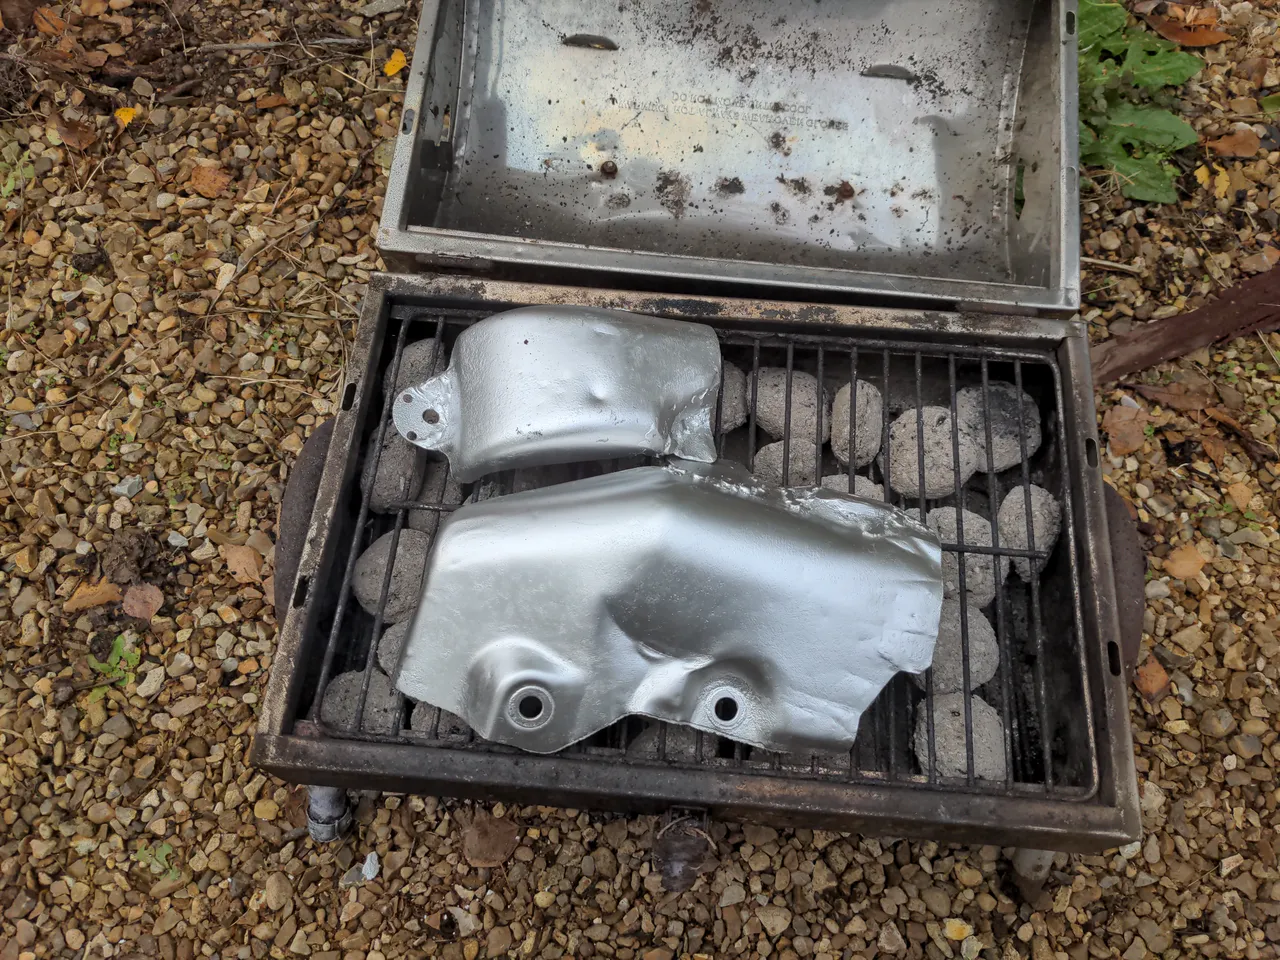 Both sections of my heat shield are painted silver, and are sitting in my BBQ, with the charcoal now fully grey.